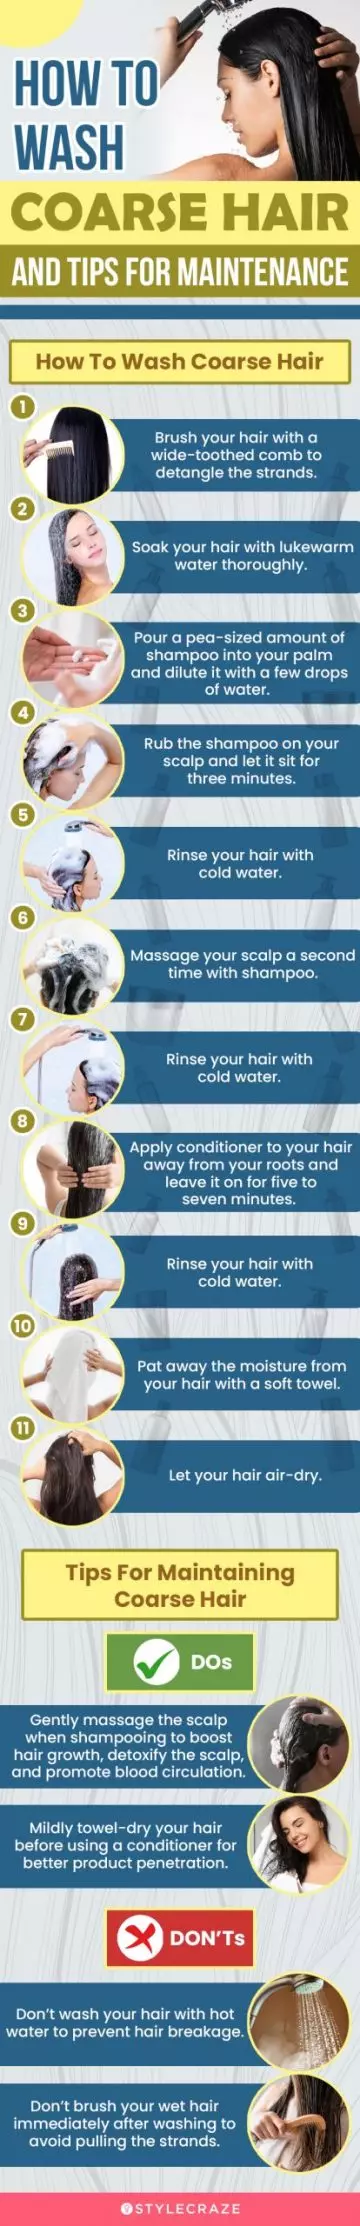 How To Wash Coarse Hair And Tips For Maintenance